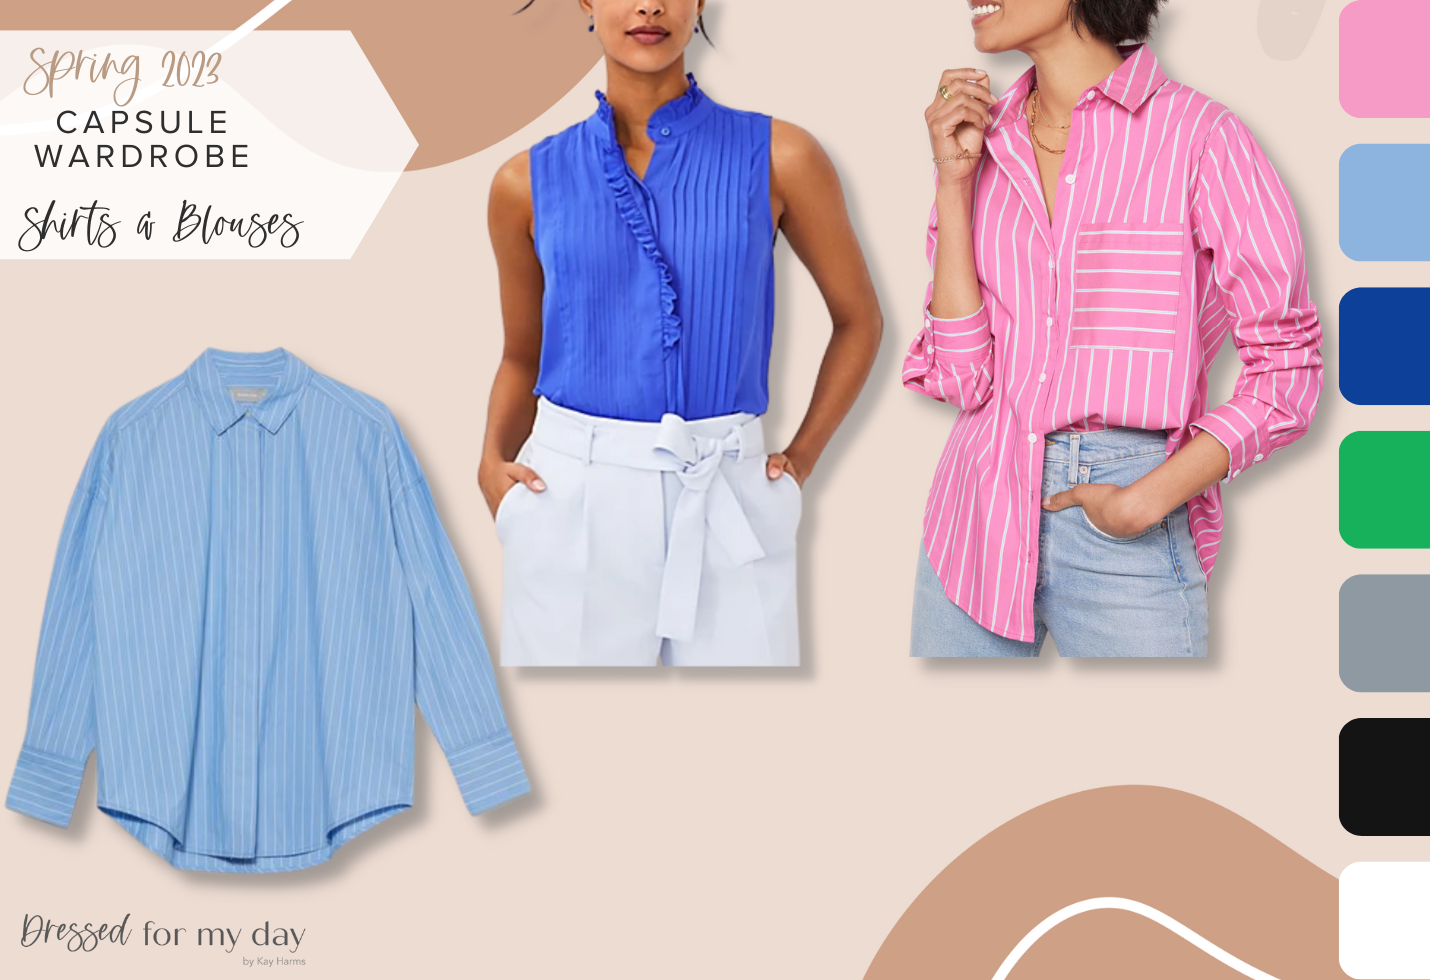 My Spring 2023 Capsule Wardrobe Blouses and Shirts